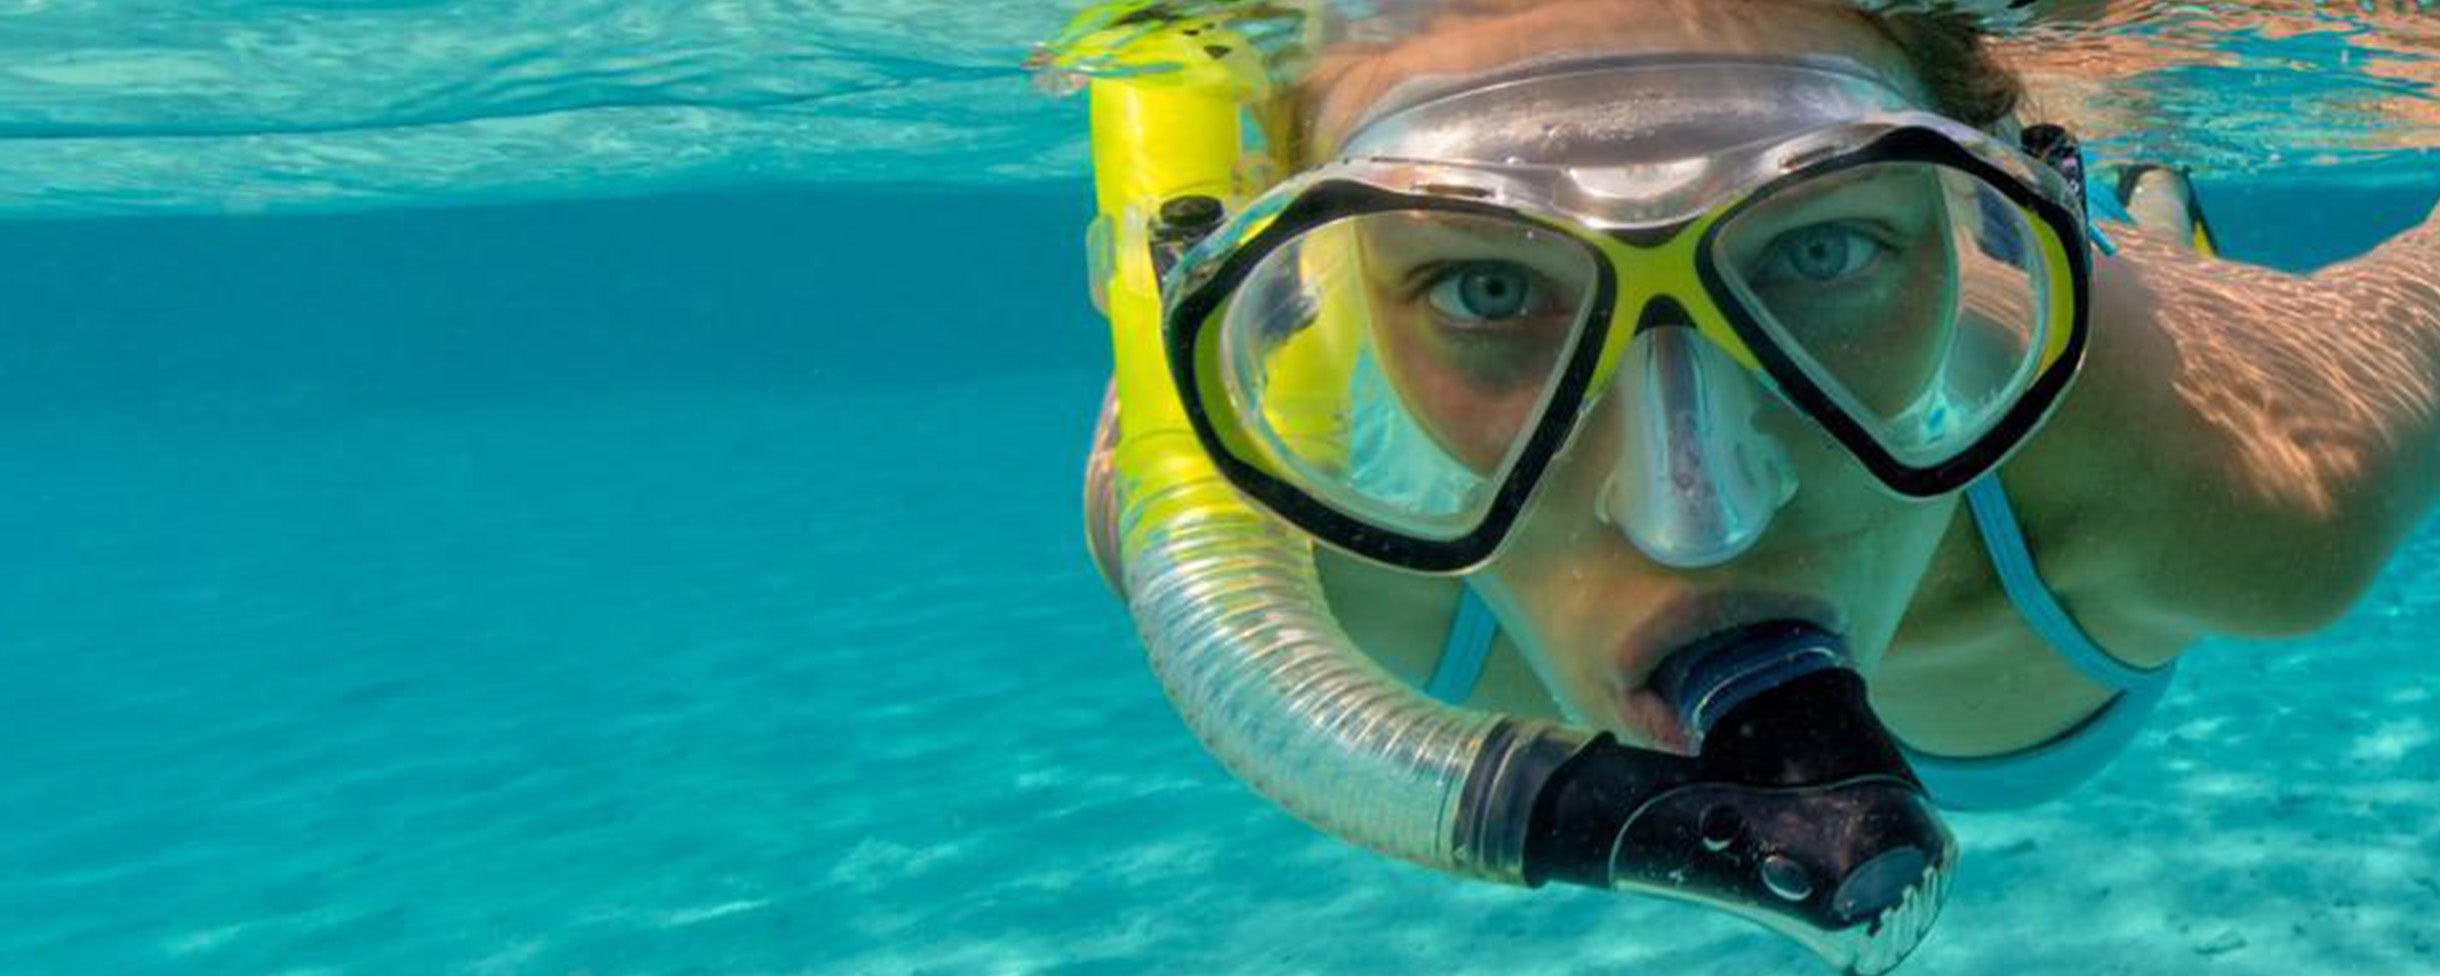 A snorkeler approaching the camera in clear blue water in San Diego - WIth gear from Everyday California on a snorkel tour